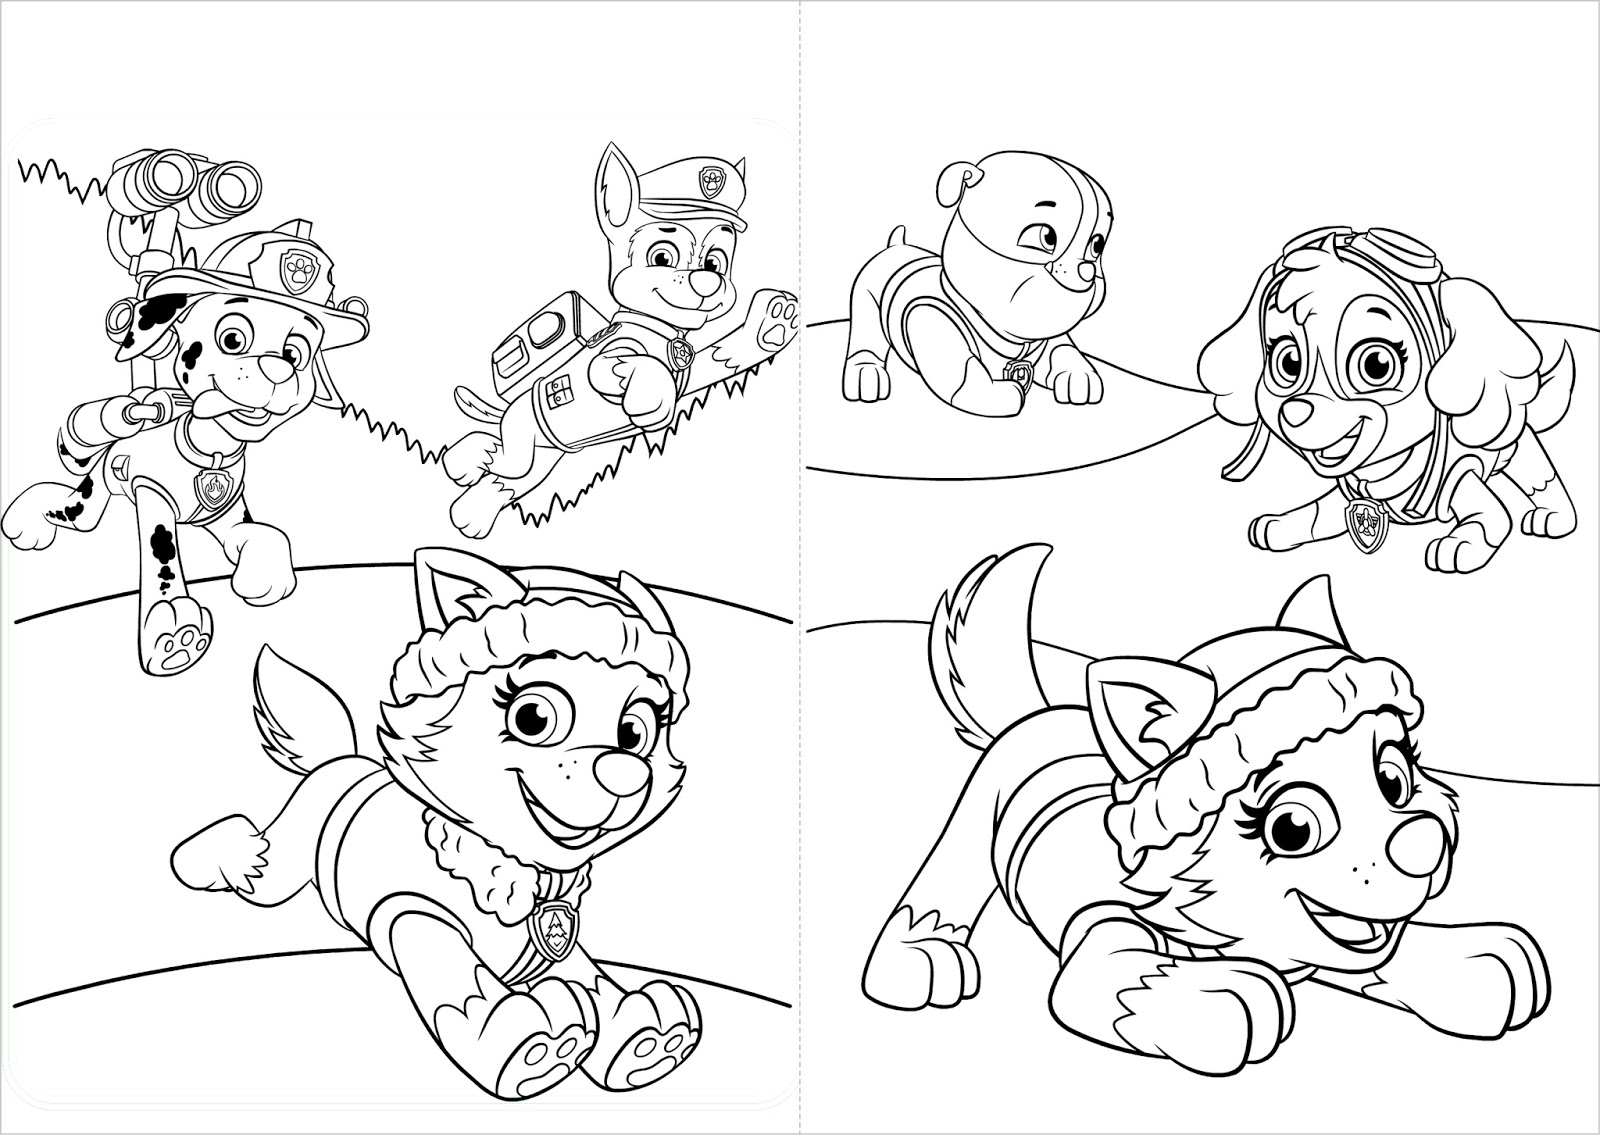 Patrulha Canina  Paw patrol coloring pages, Paw patrol coloring, Cartoon  coloring pages